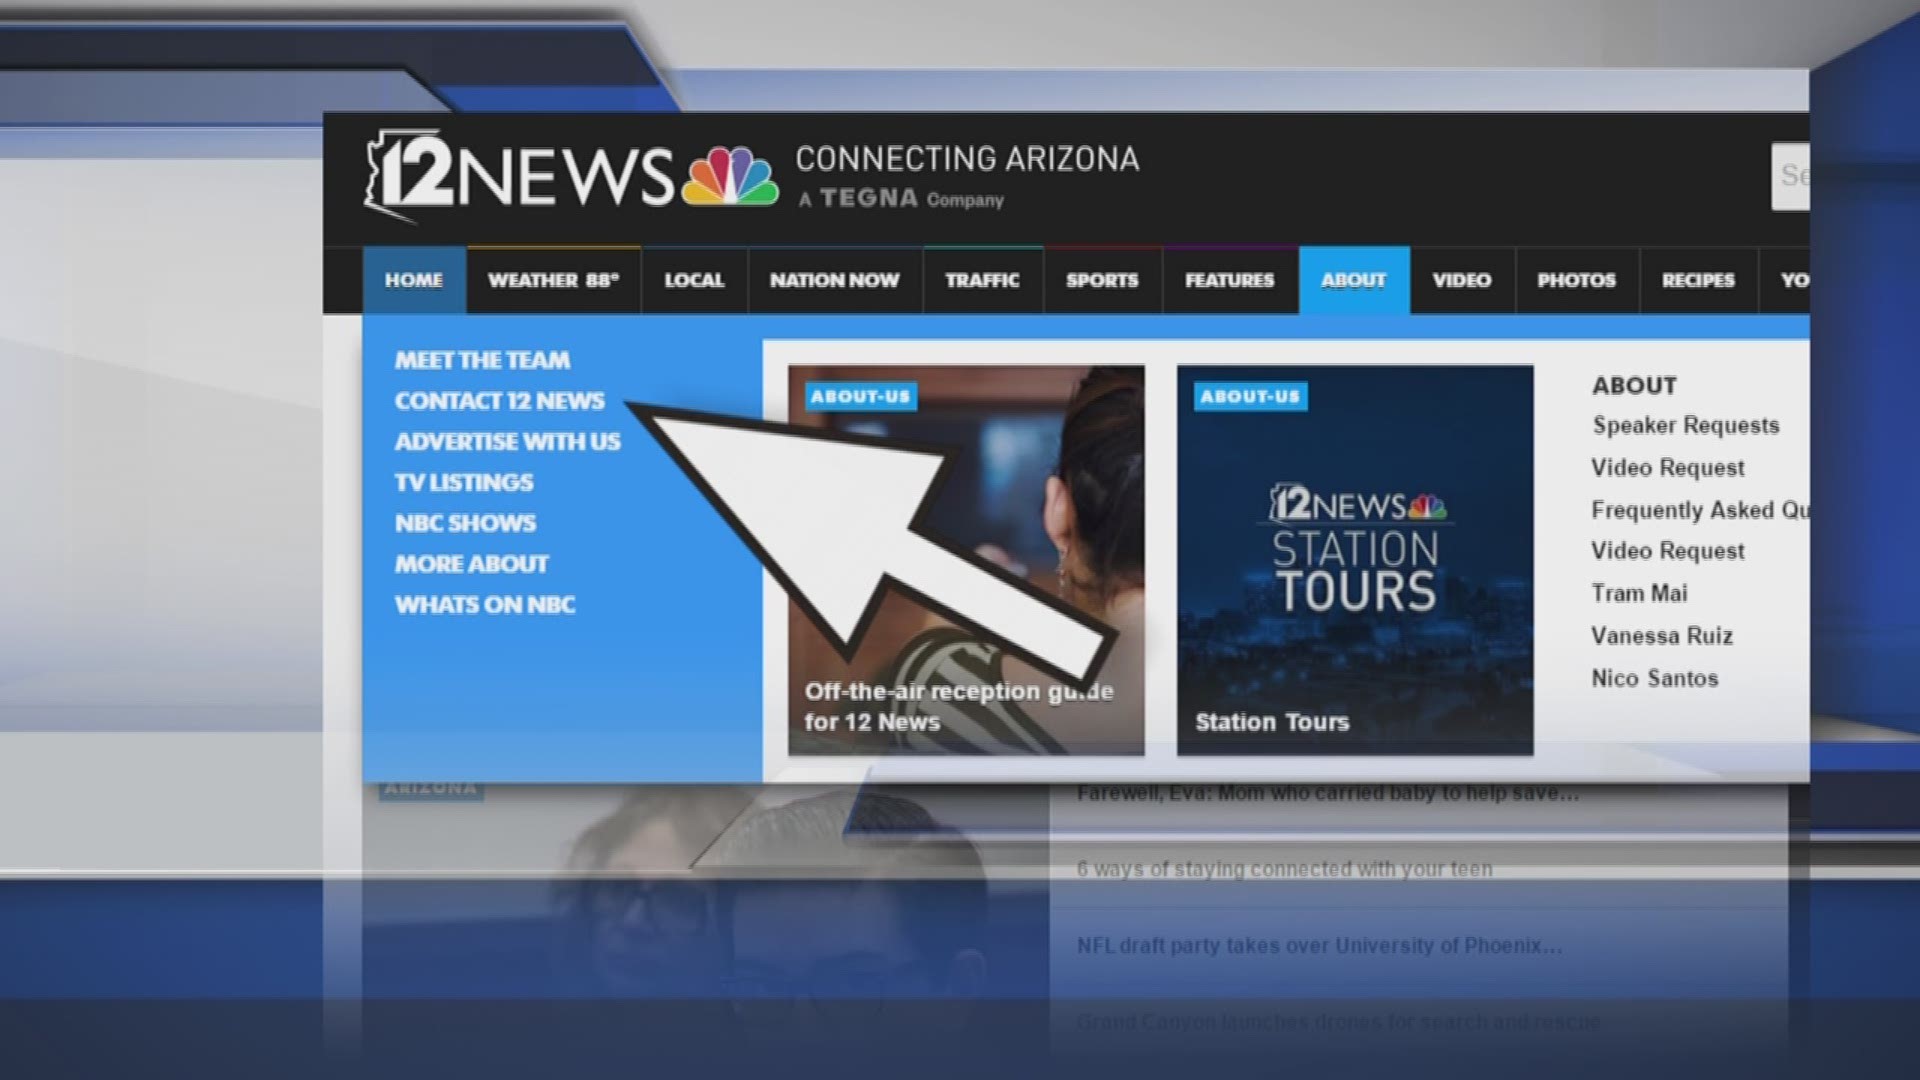 If you have a story idea or an event you think we should cover, visit www.12news.com and go to the 'About' tab to click on 'Contact 12 News.'